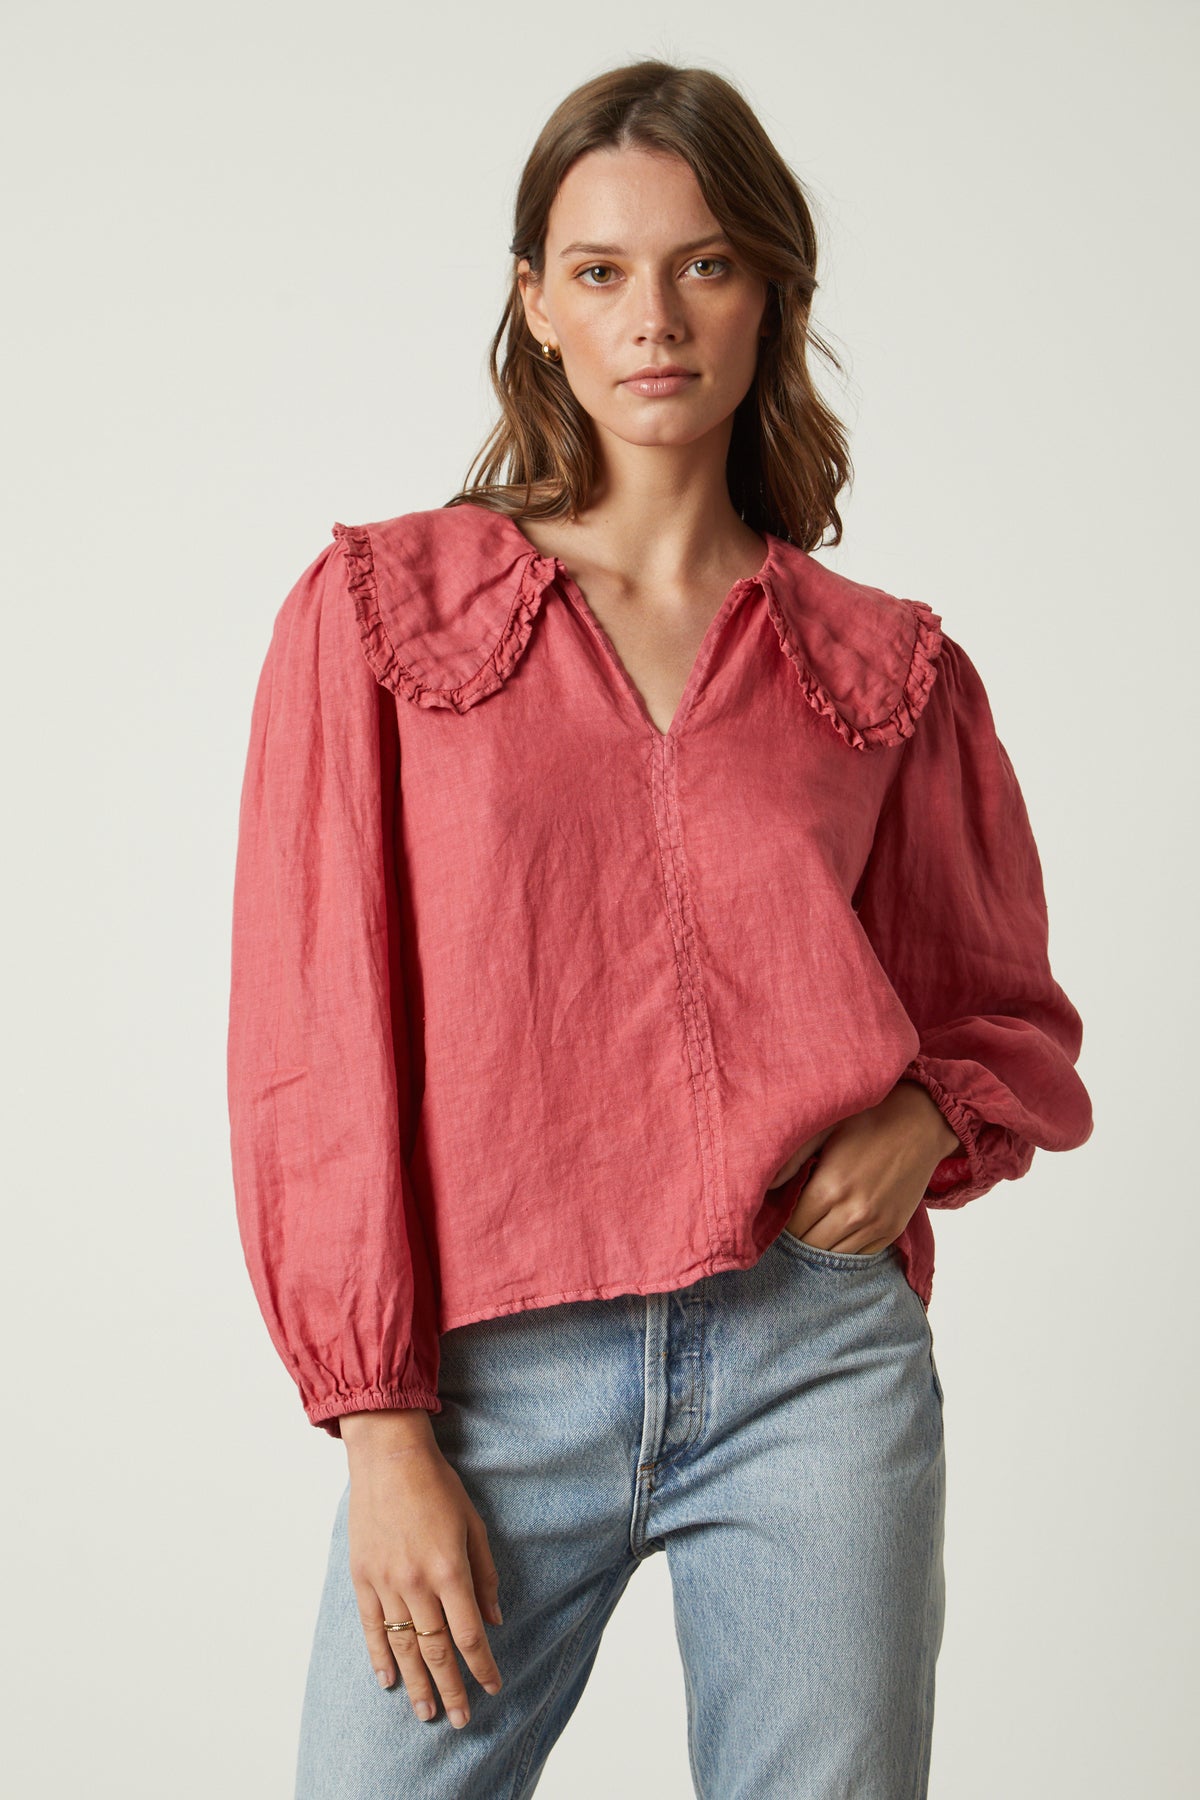   The model is wearing a pink SOFIA LINEN TOP from Velvet by Graham & Spencer with ruffled sleeves. 